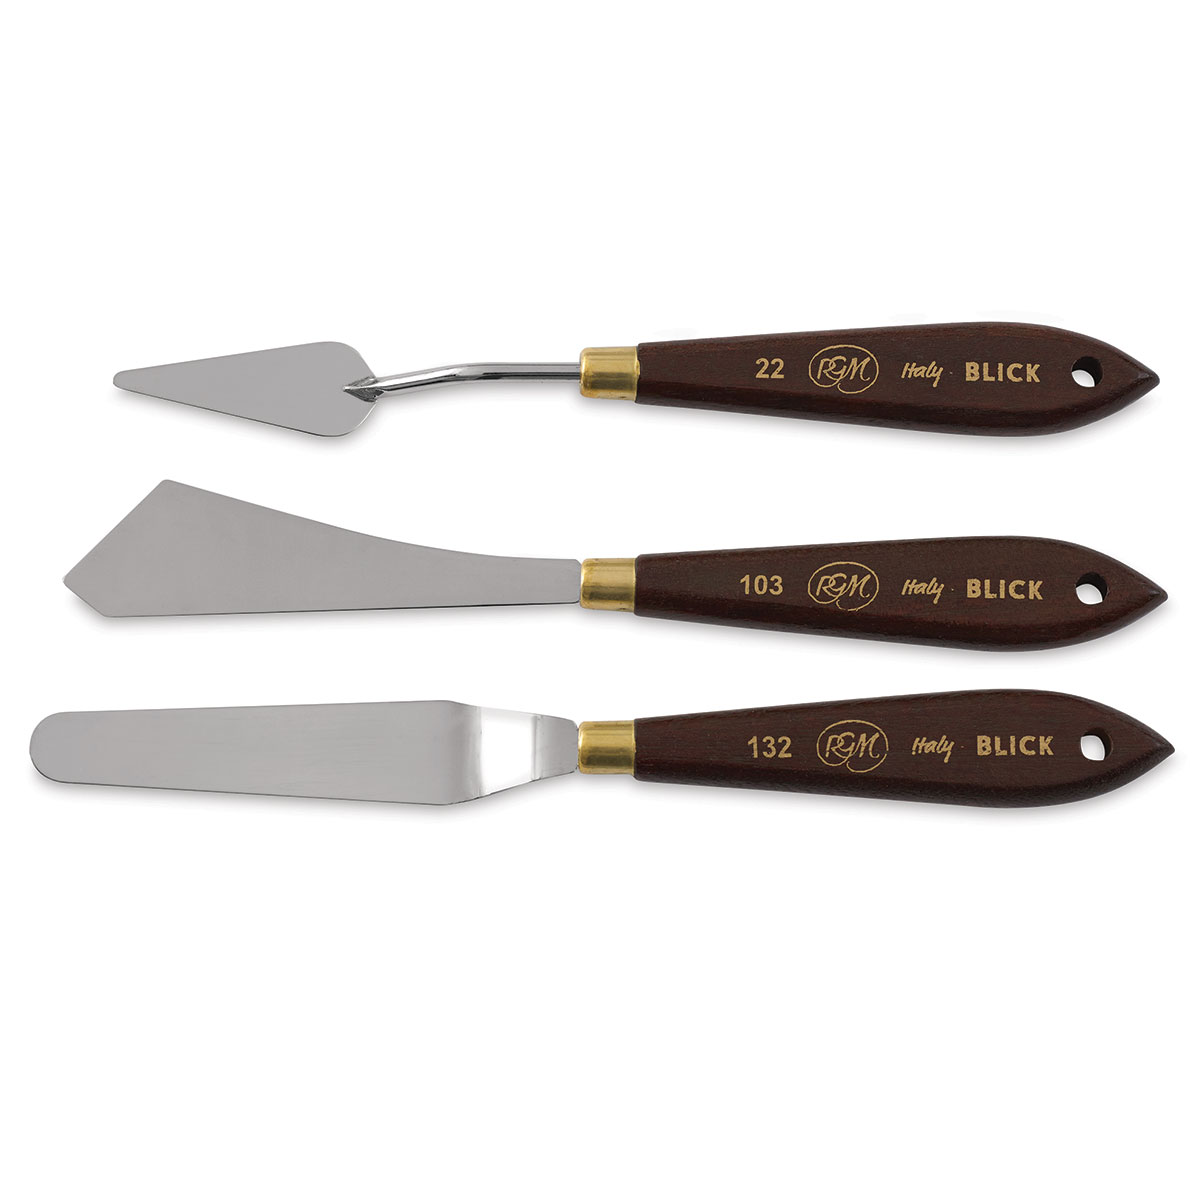 Blick Painting Knives - Traditional Knives, Set of 3